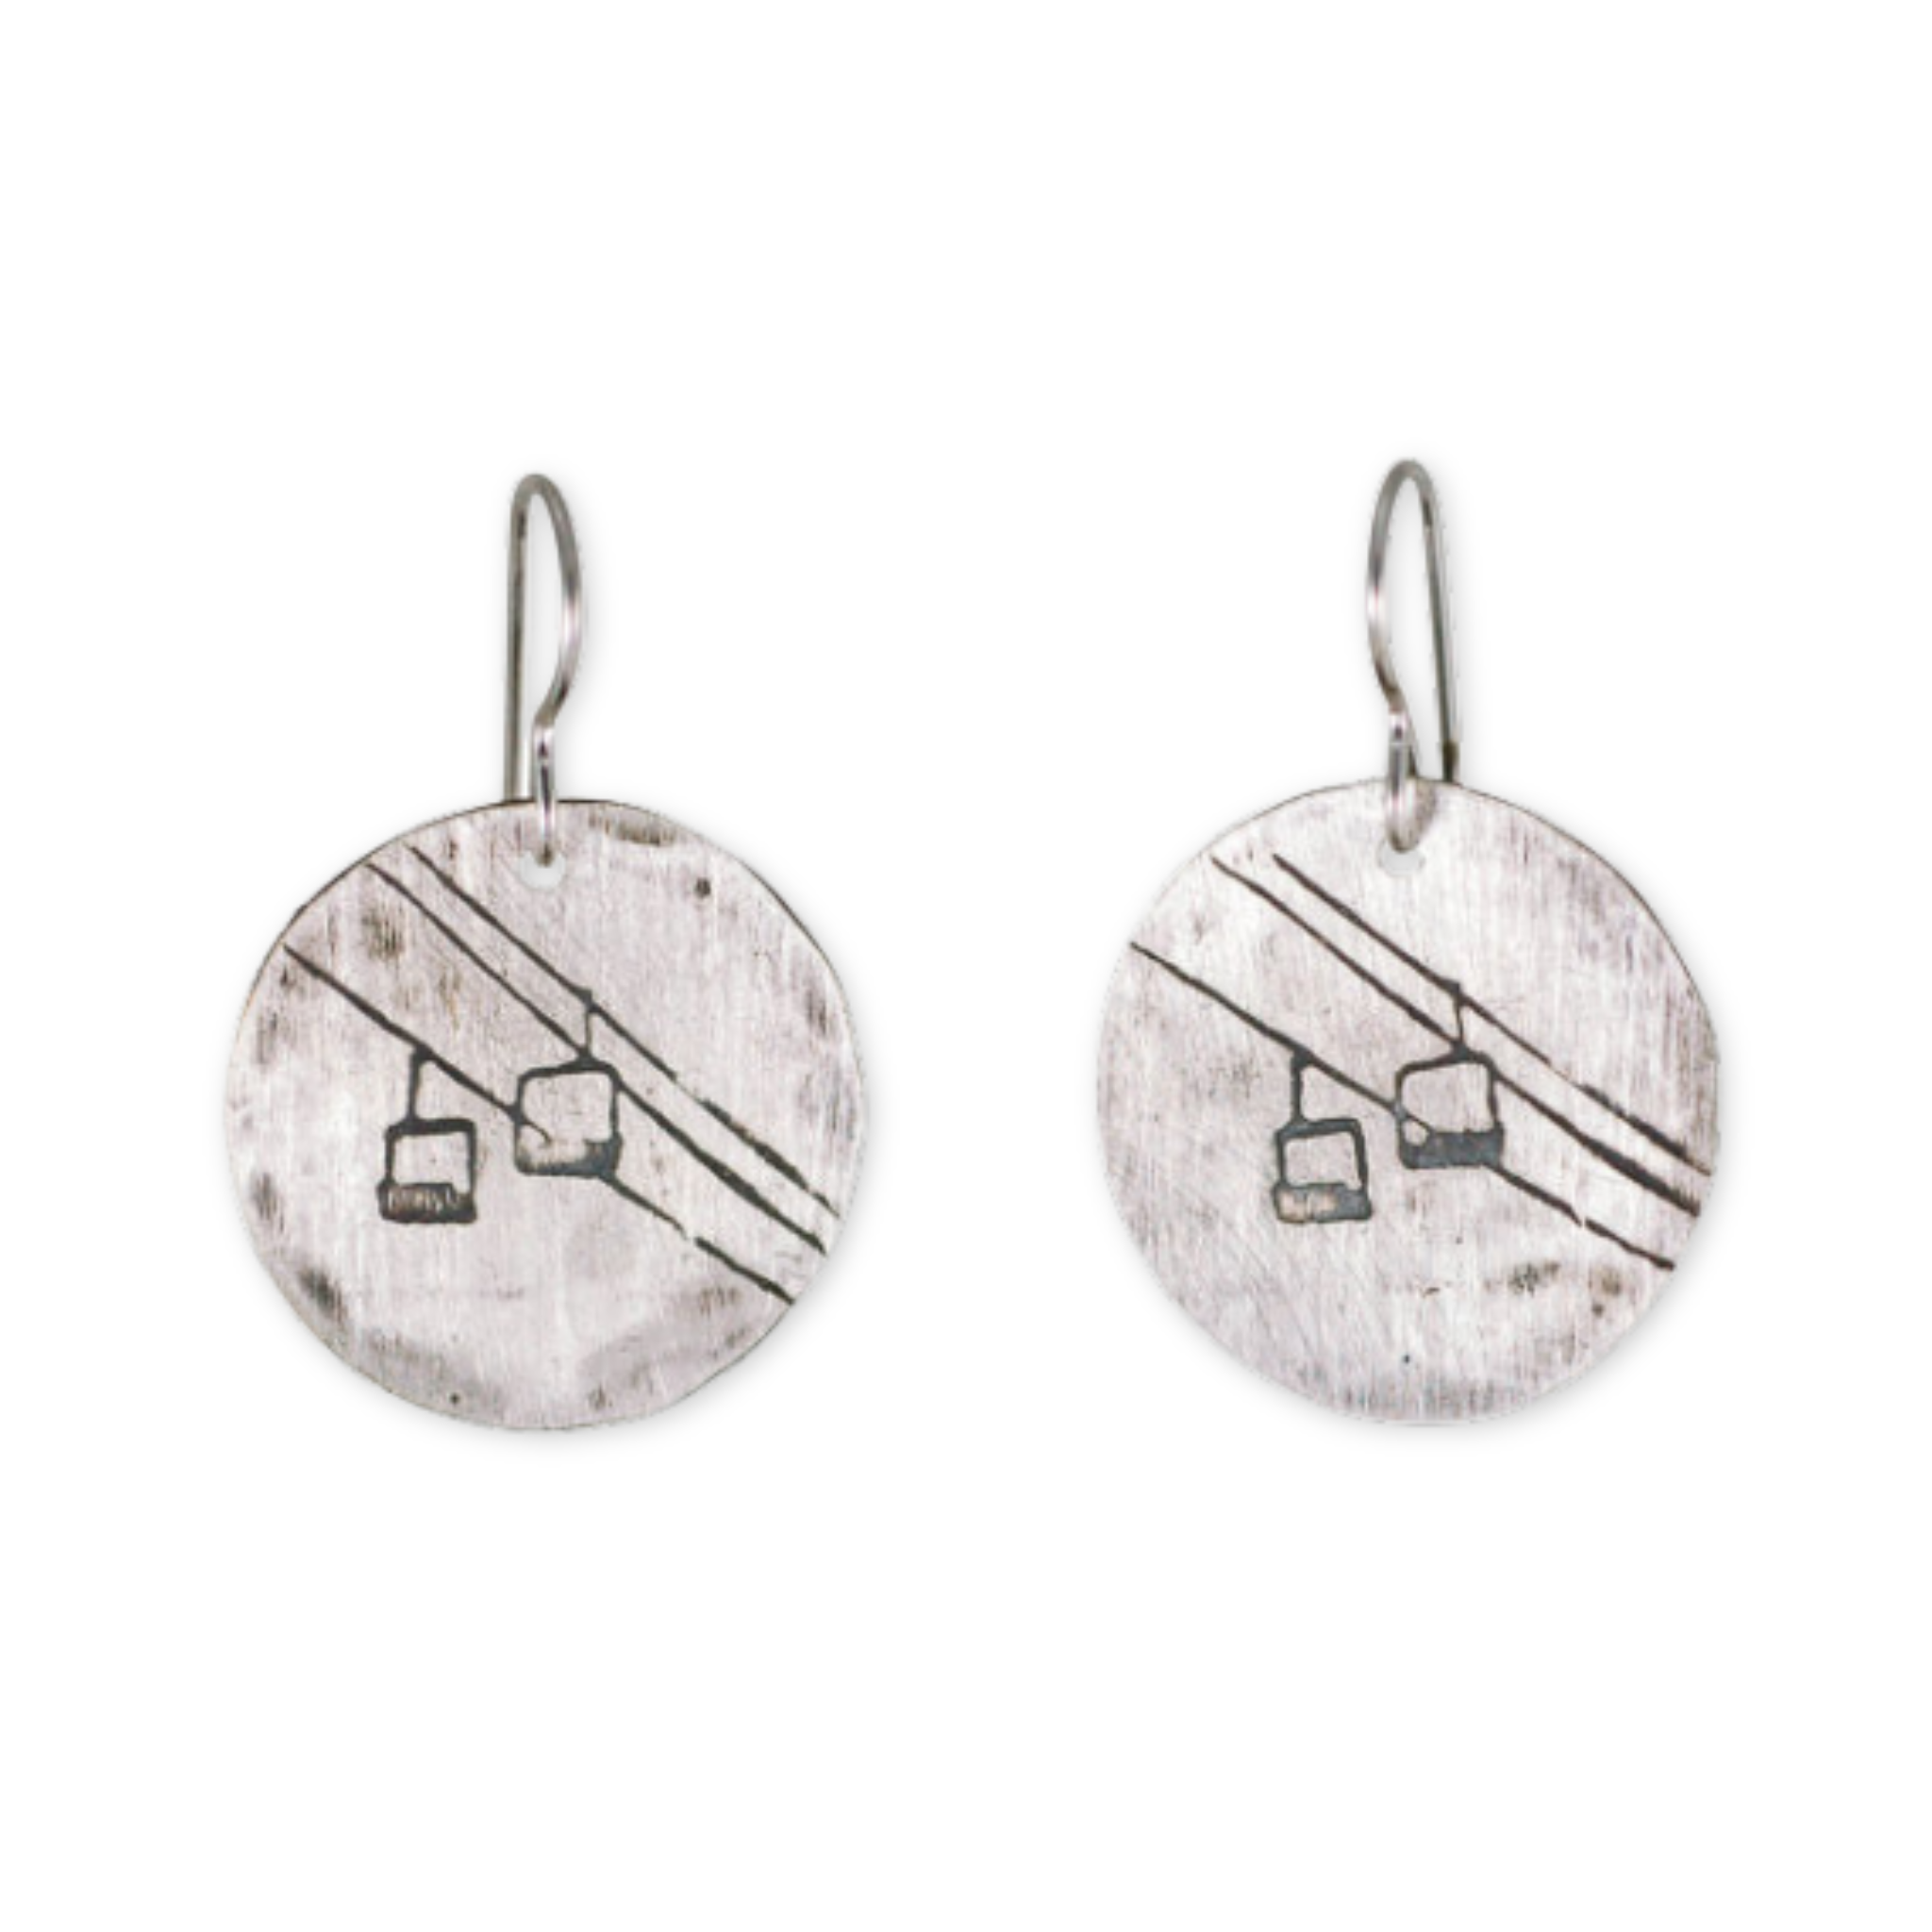 silver earrings with a chairlift design